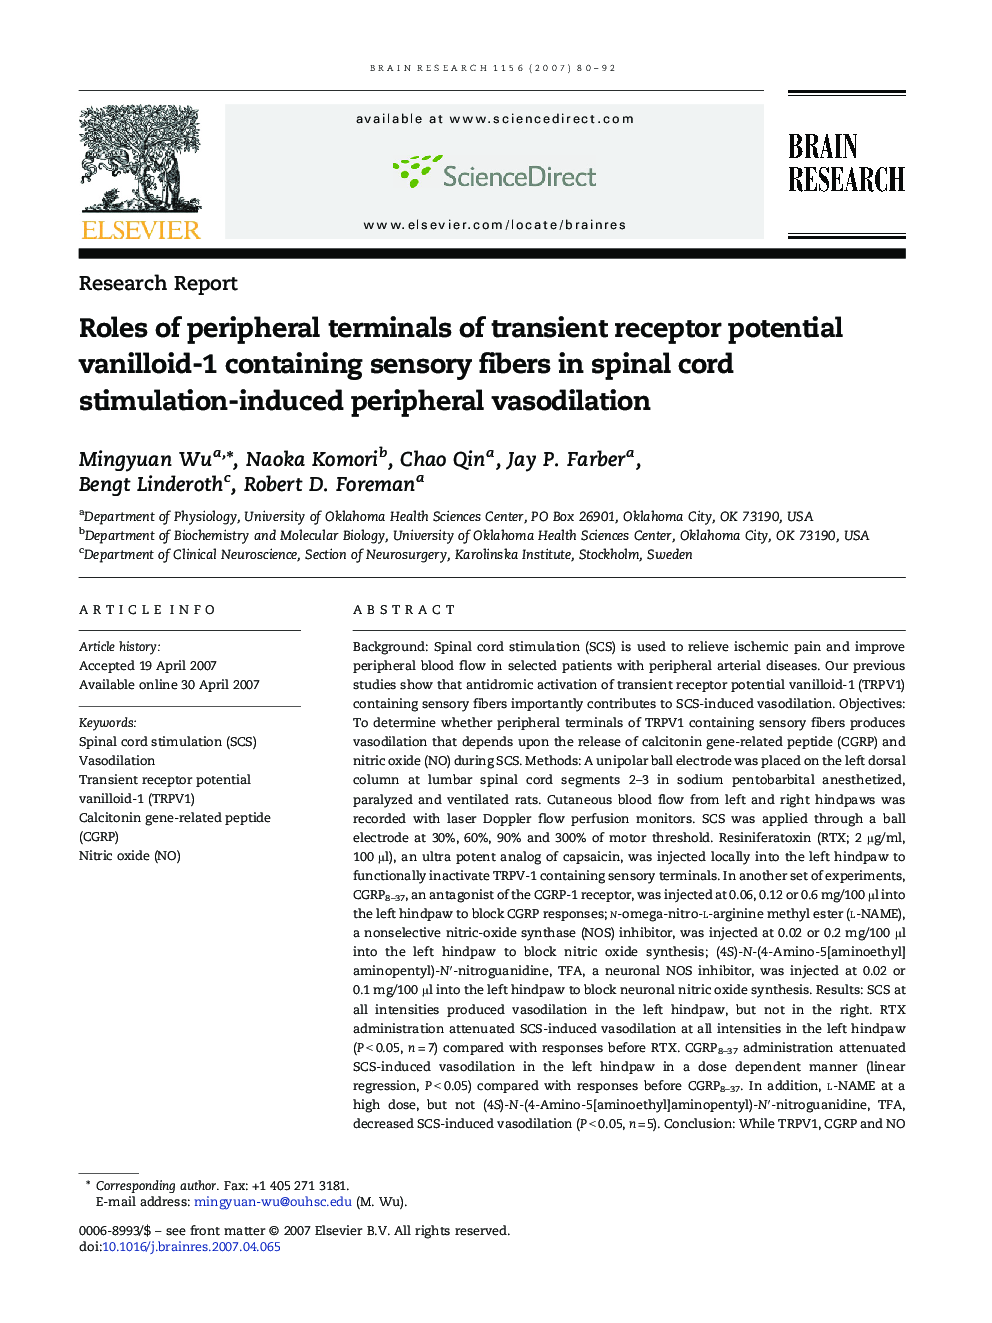 Roles of peripheral terminals of transient receptor potential vanilloid-1 containing sensory fibers in spinal cord stimulation-induced peripheral vasodilation